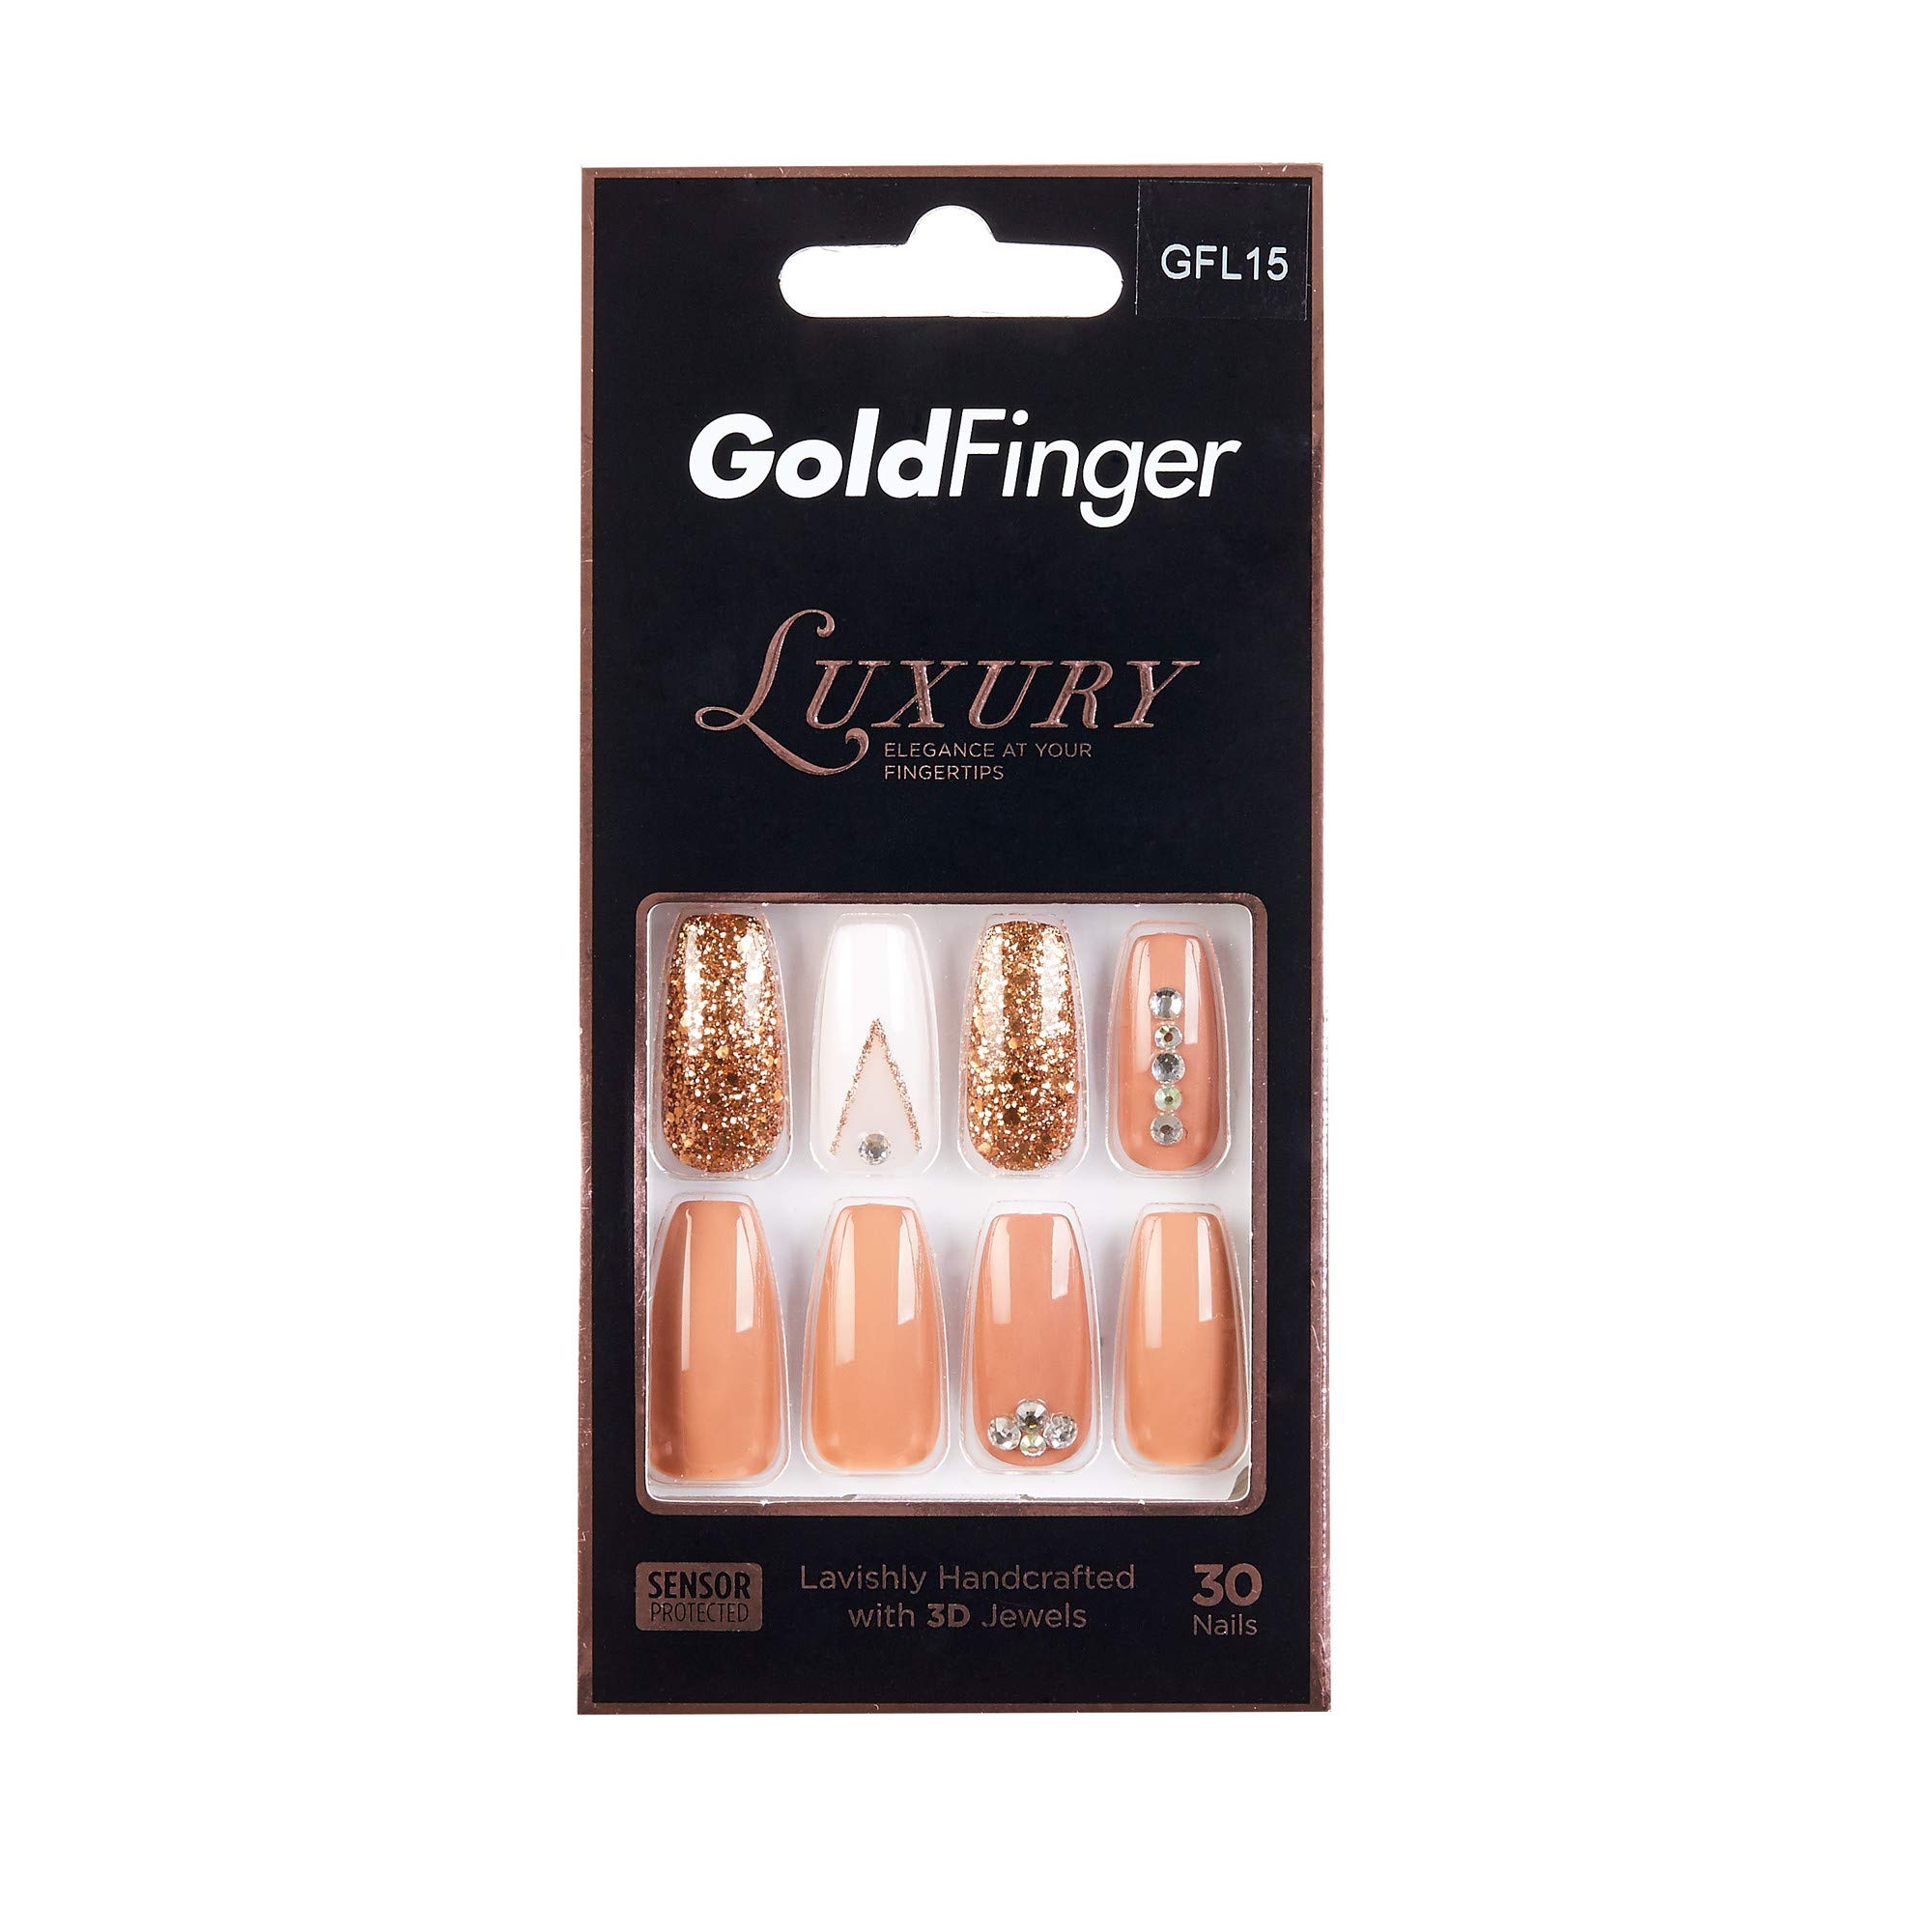 Amazon.com : Gold Finger Full Cover Nails Gel Glam Ready to Wear Gel  Manicure Long Nails : False Nails : Beauty & Personal Care